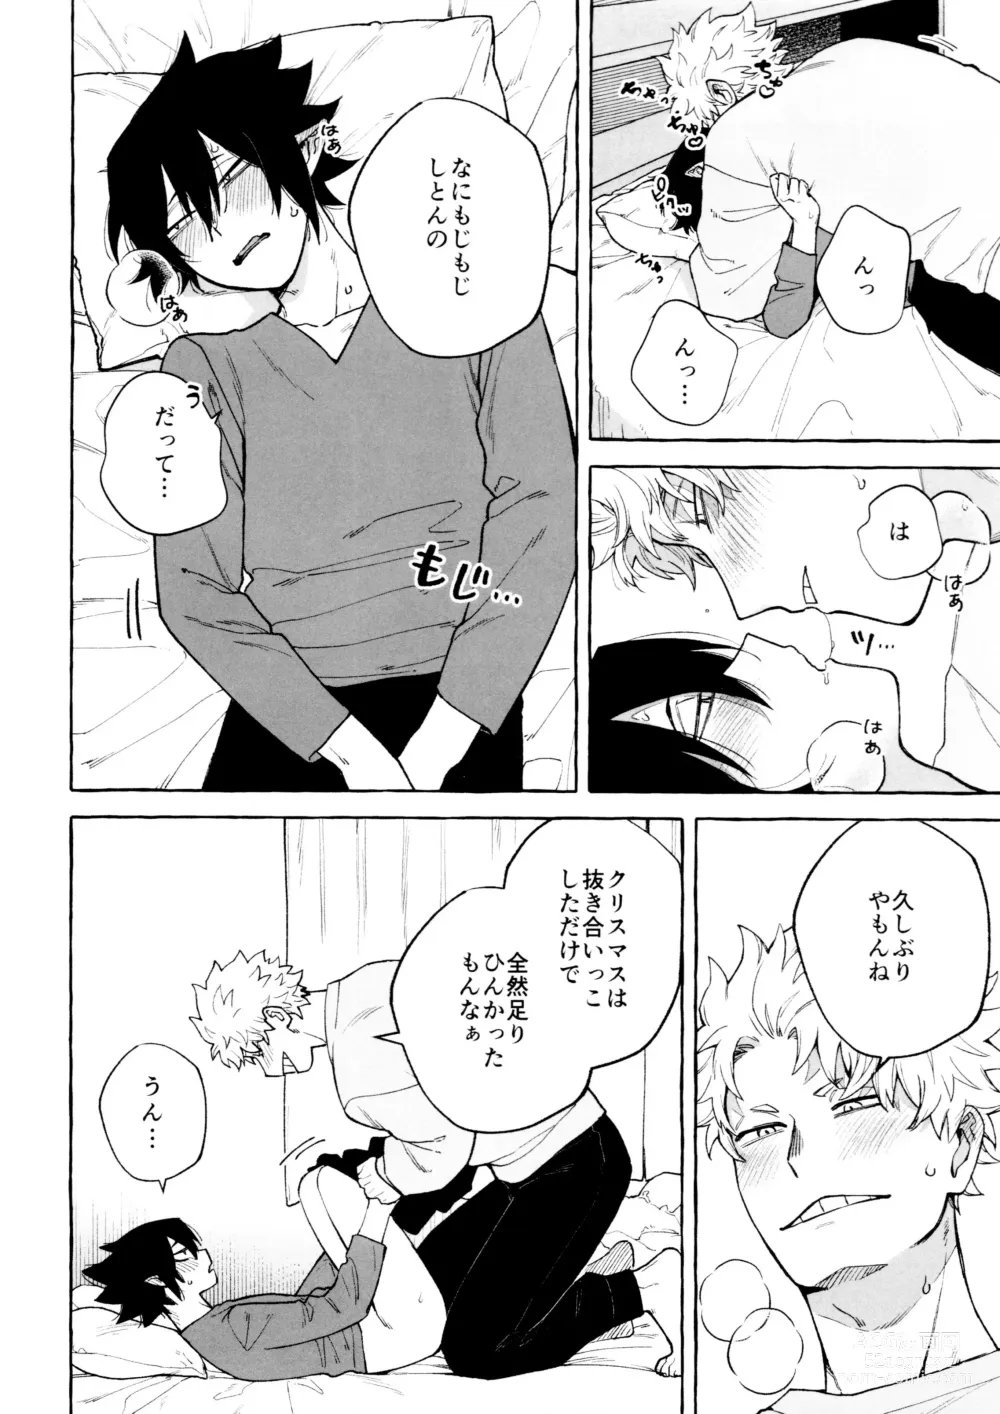 Page 8 of doujinshi Please please